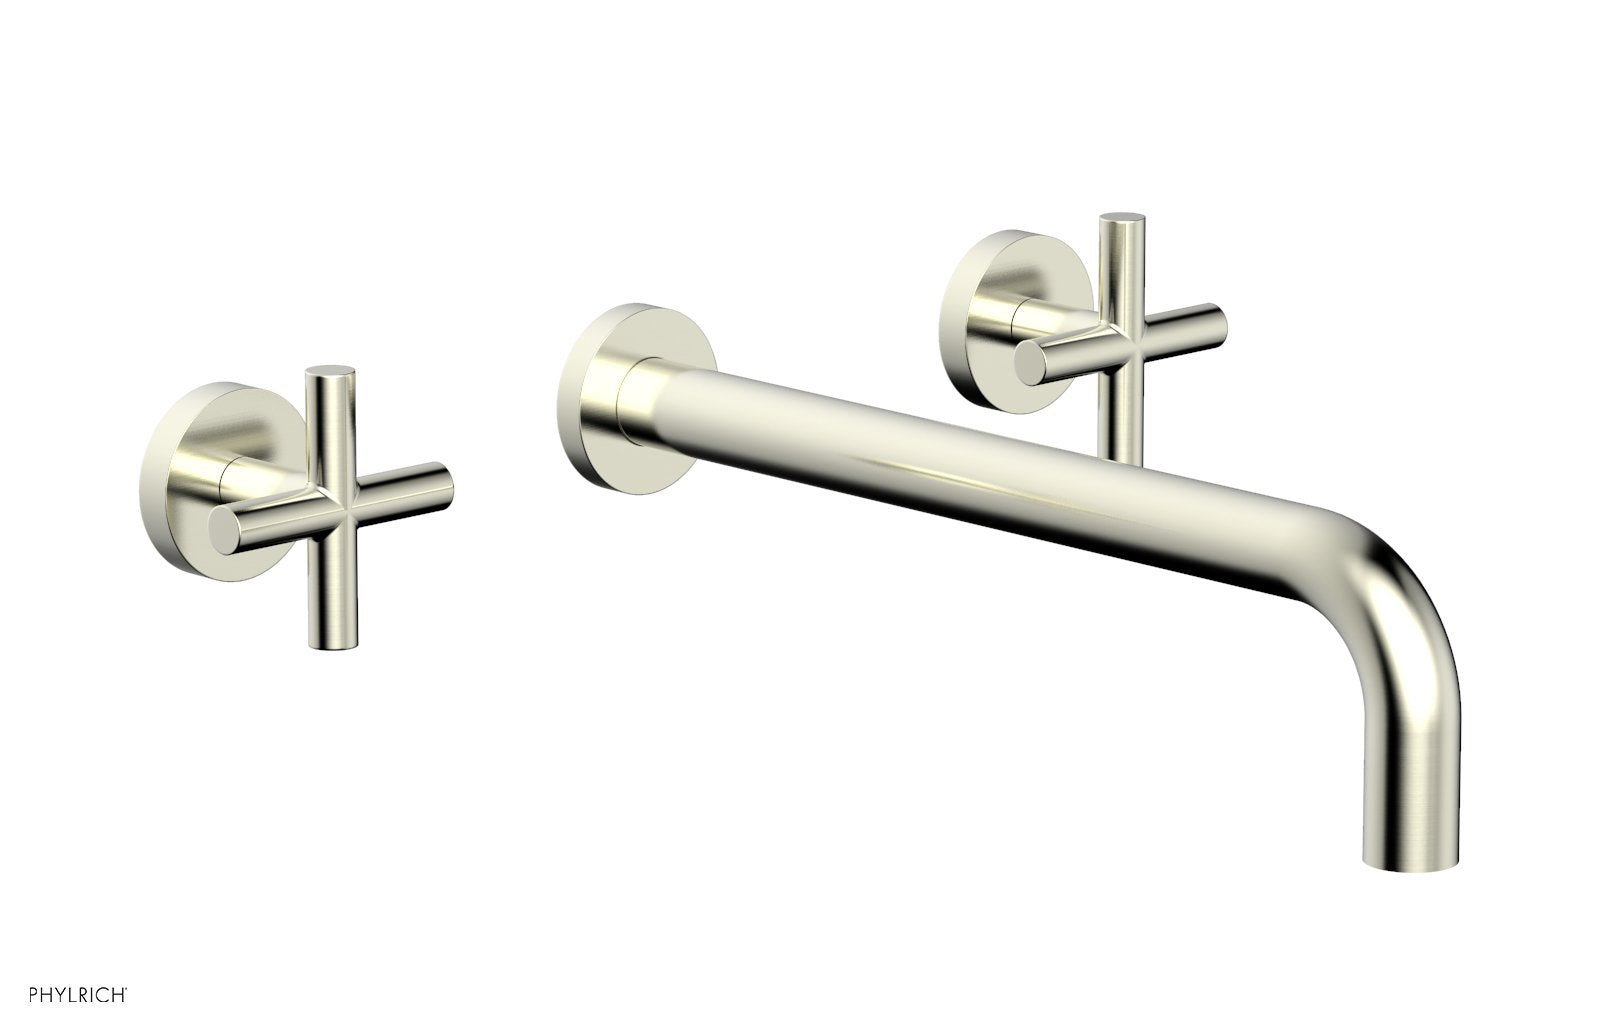 Phylrich TRANSITION Wall Tub Set 12" Spout - Cross Handles